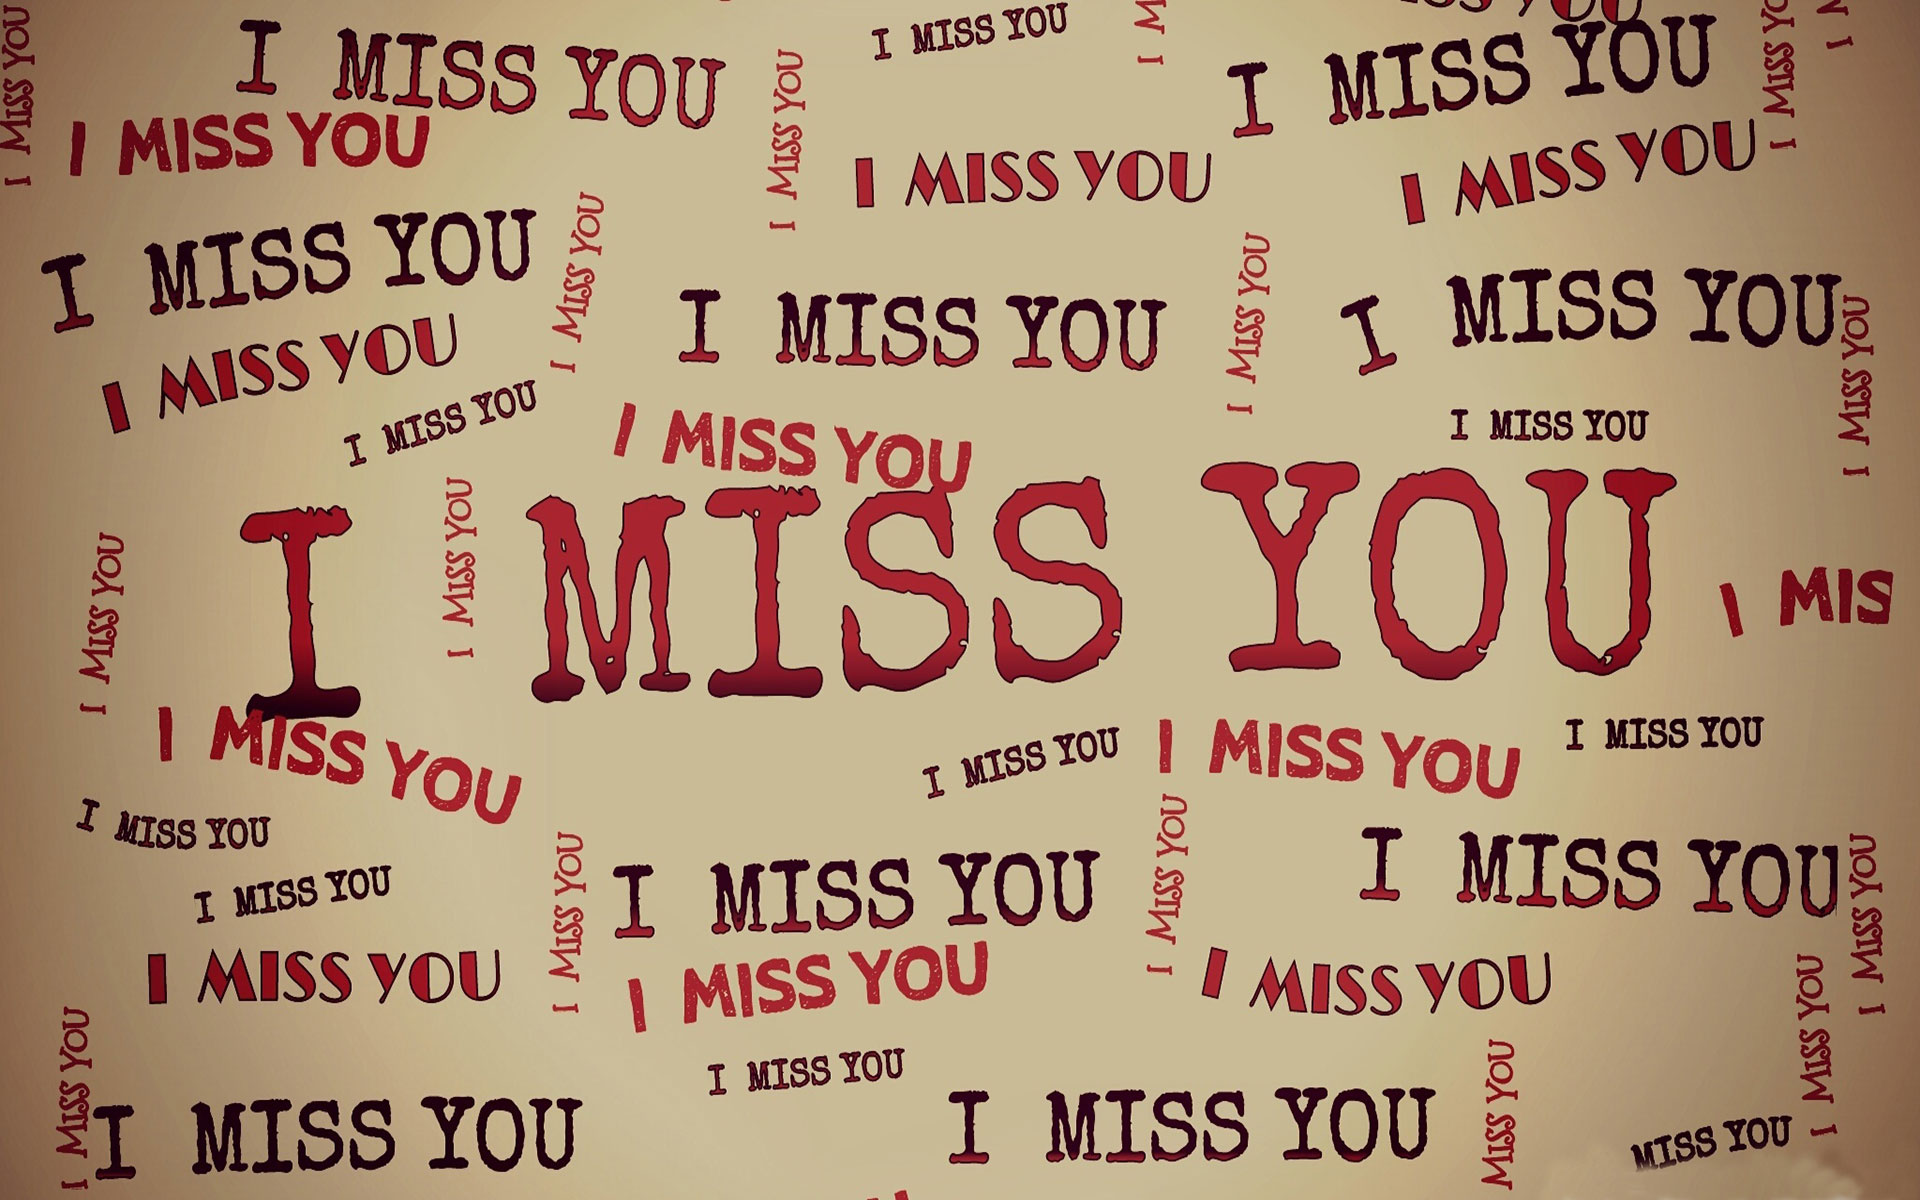 HD I Miss You Wallpaper for him or her-Romantic Wallpapers-Chobirdokan